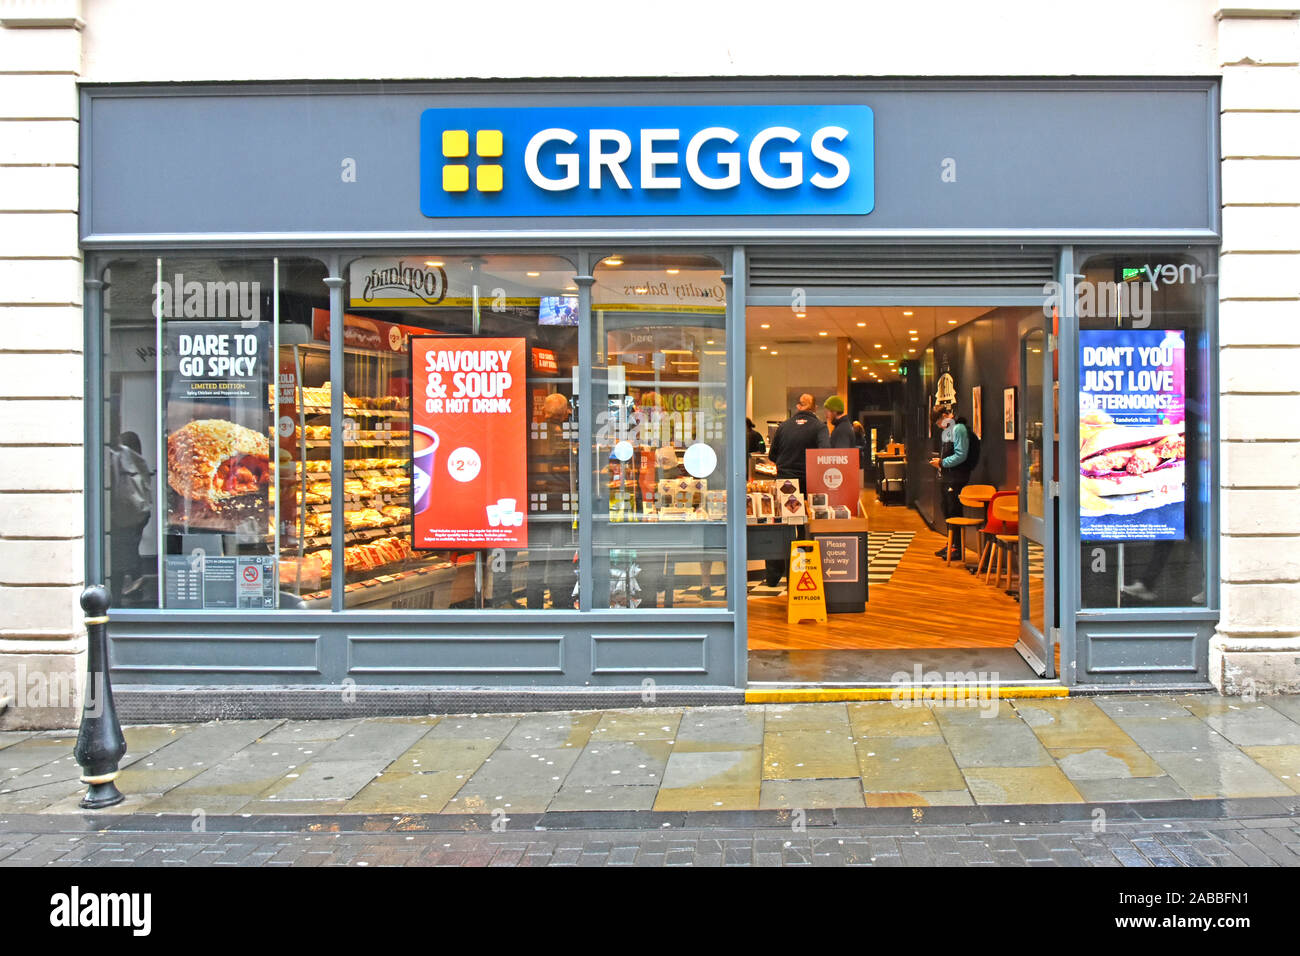 Shop front & interior Greggs sandwiches pies pastries & bakery food store customers & tables indoors out of wet rainy exterior in Durham England UK Stock Photo